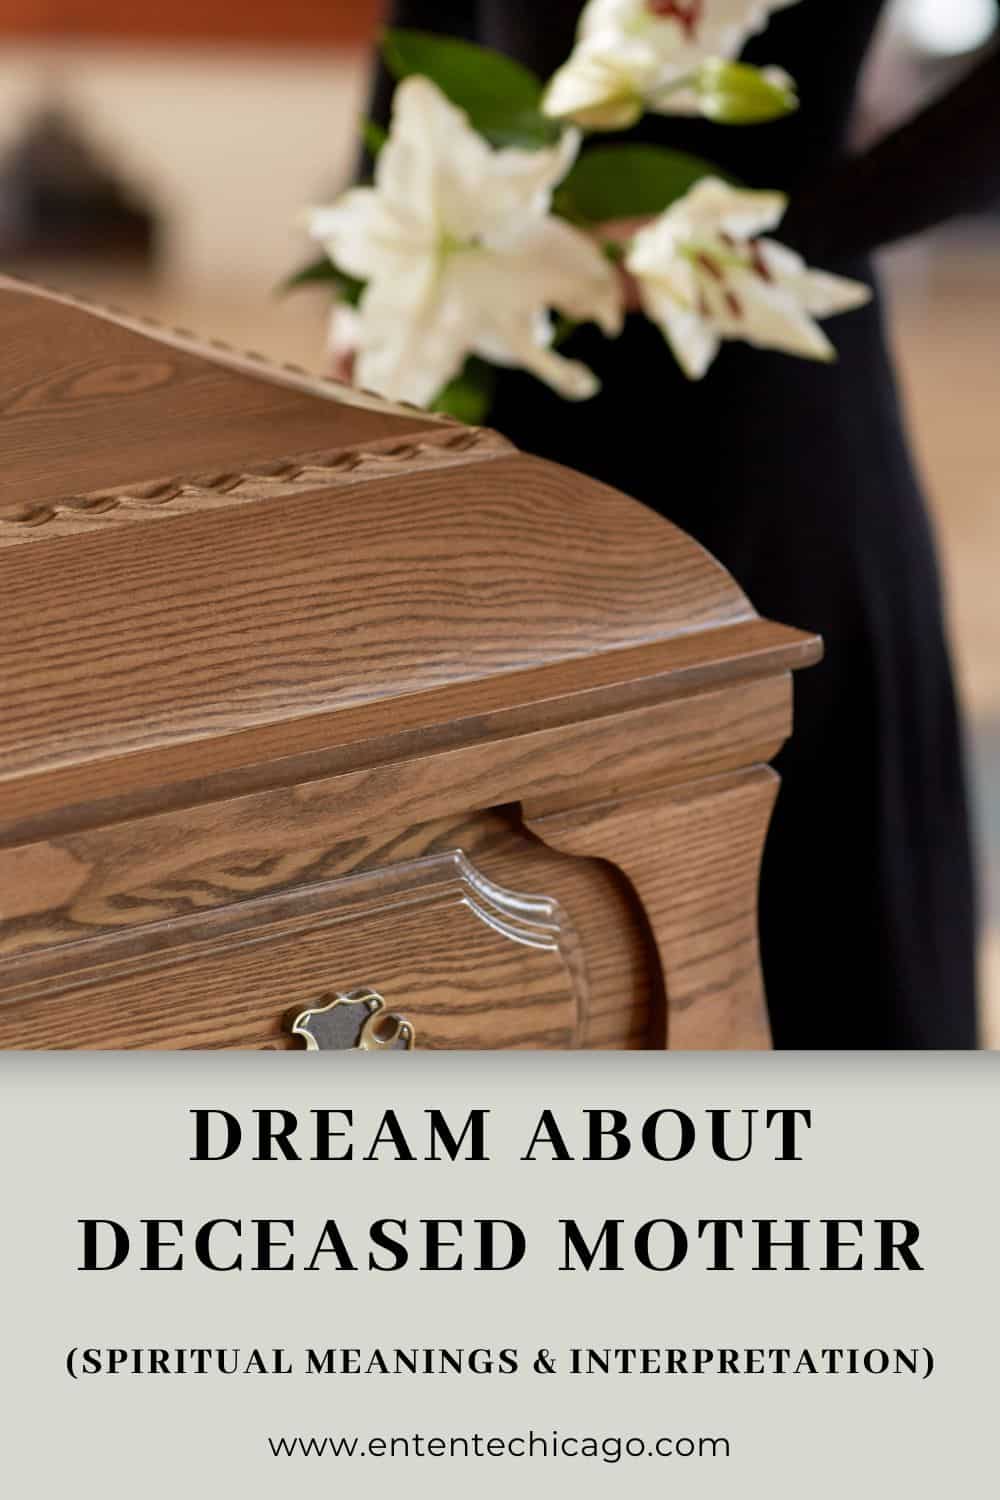 Dream About Deceased Mother (Spiritual Meanings & Interpretation)